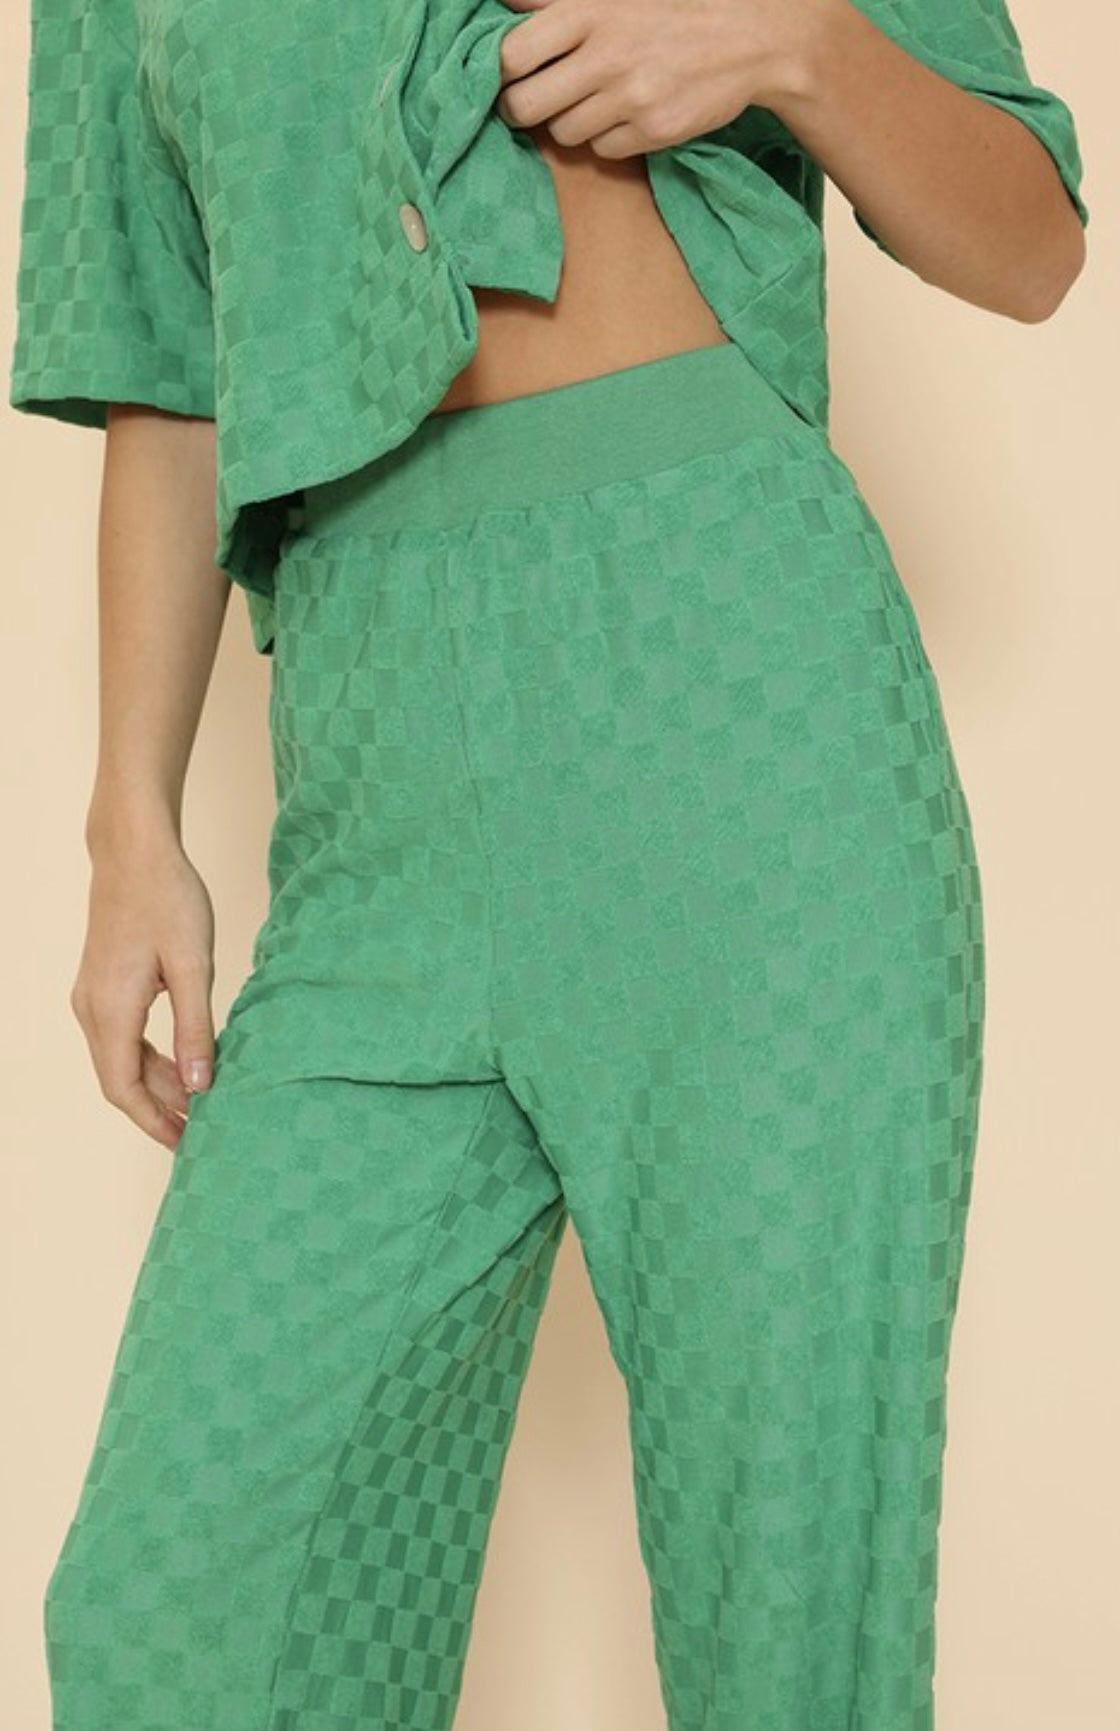 The Darcy Checkered Green Set